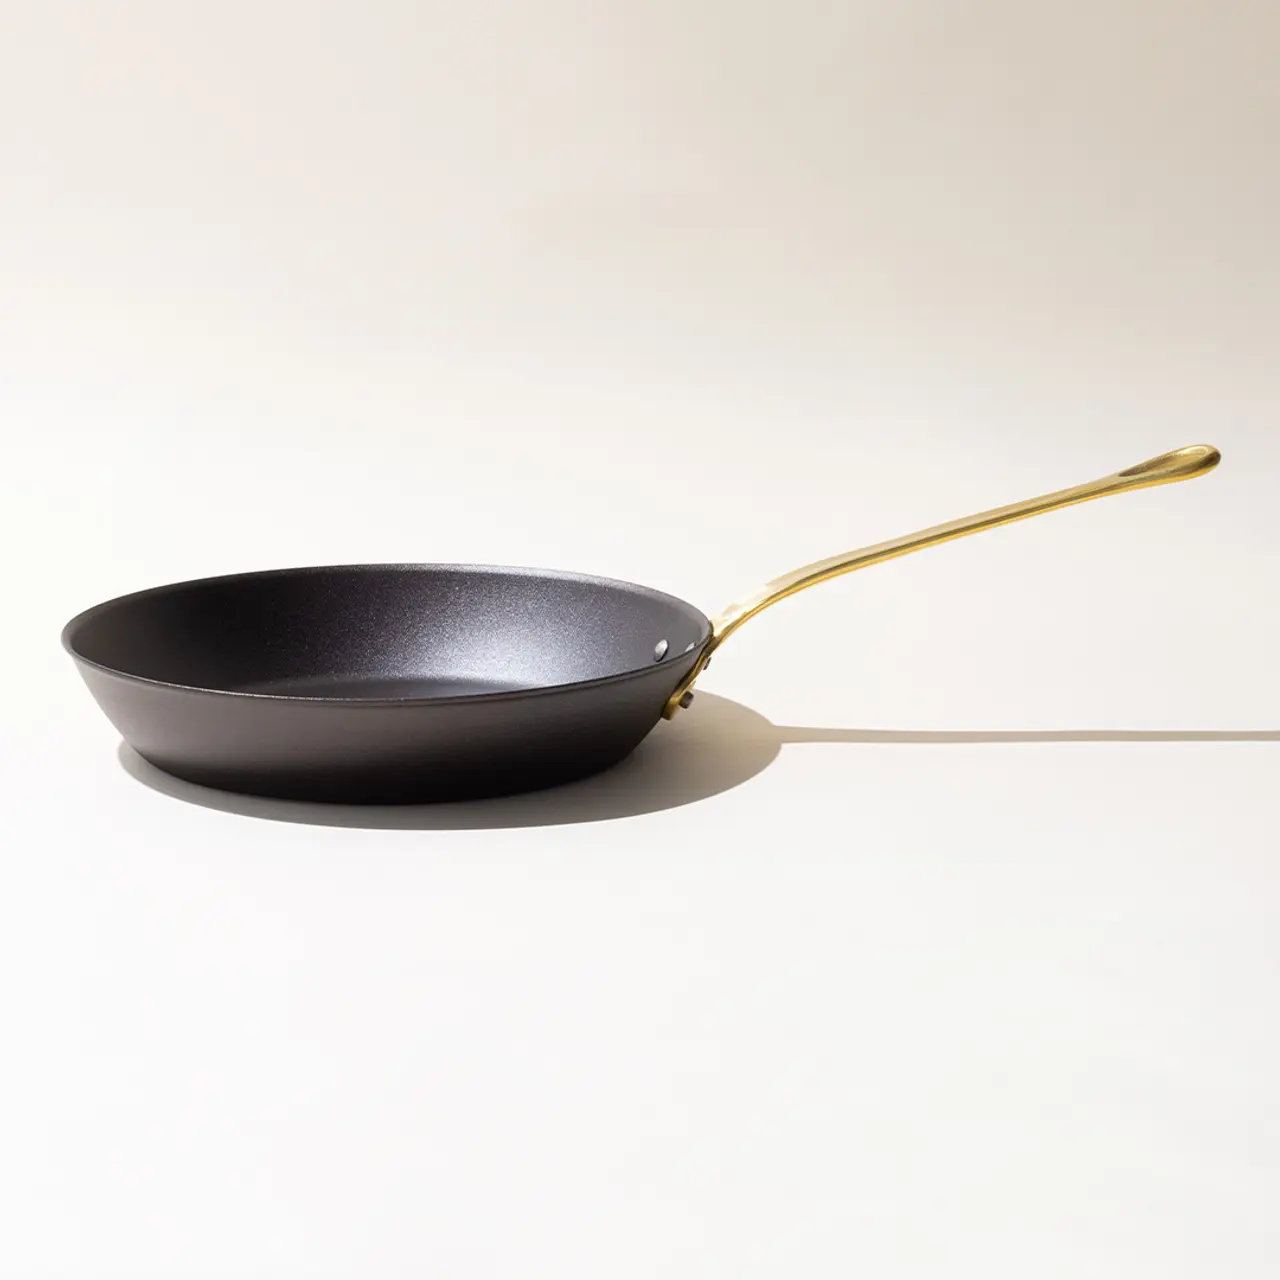 A black frying pan with a golden handle on a light background with a subtle shadow.